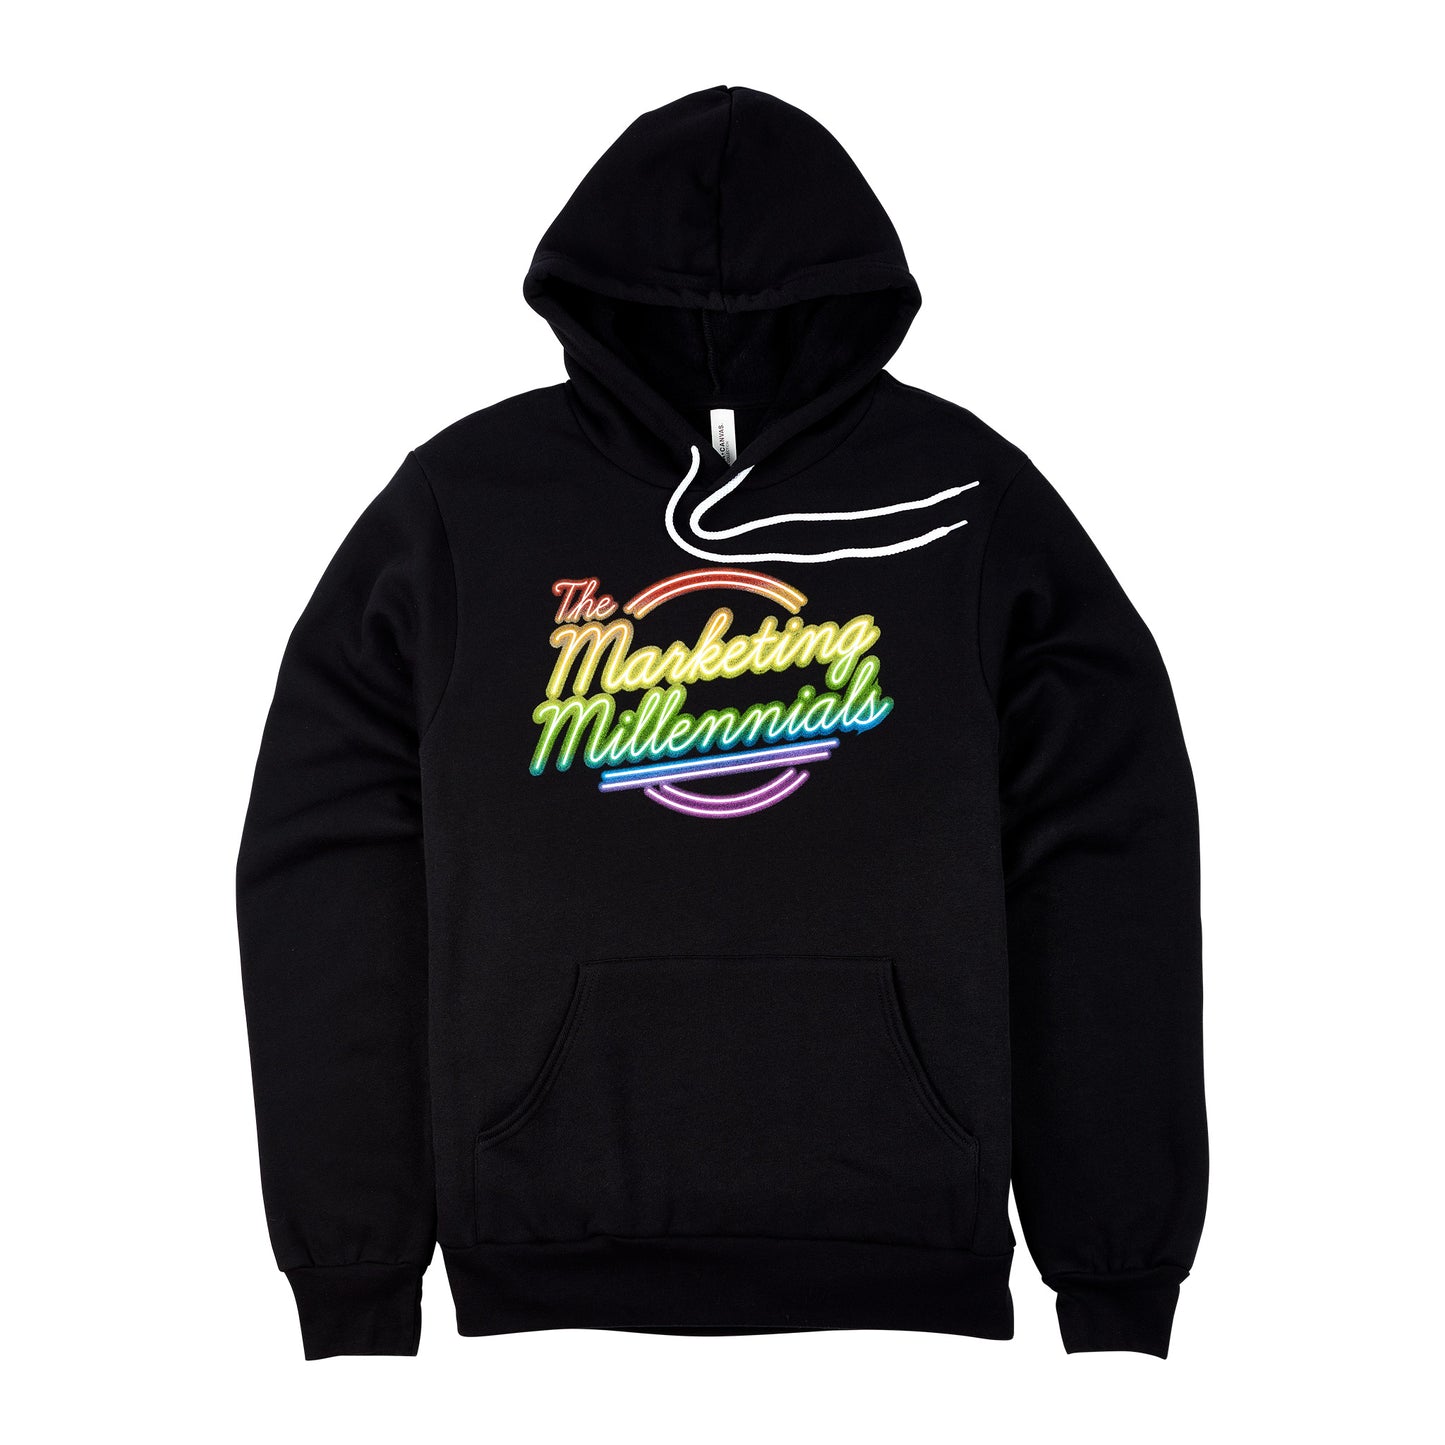 The Marketing Millennials hoodie for Pride 2022